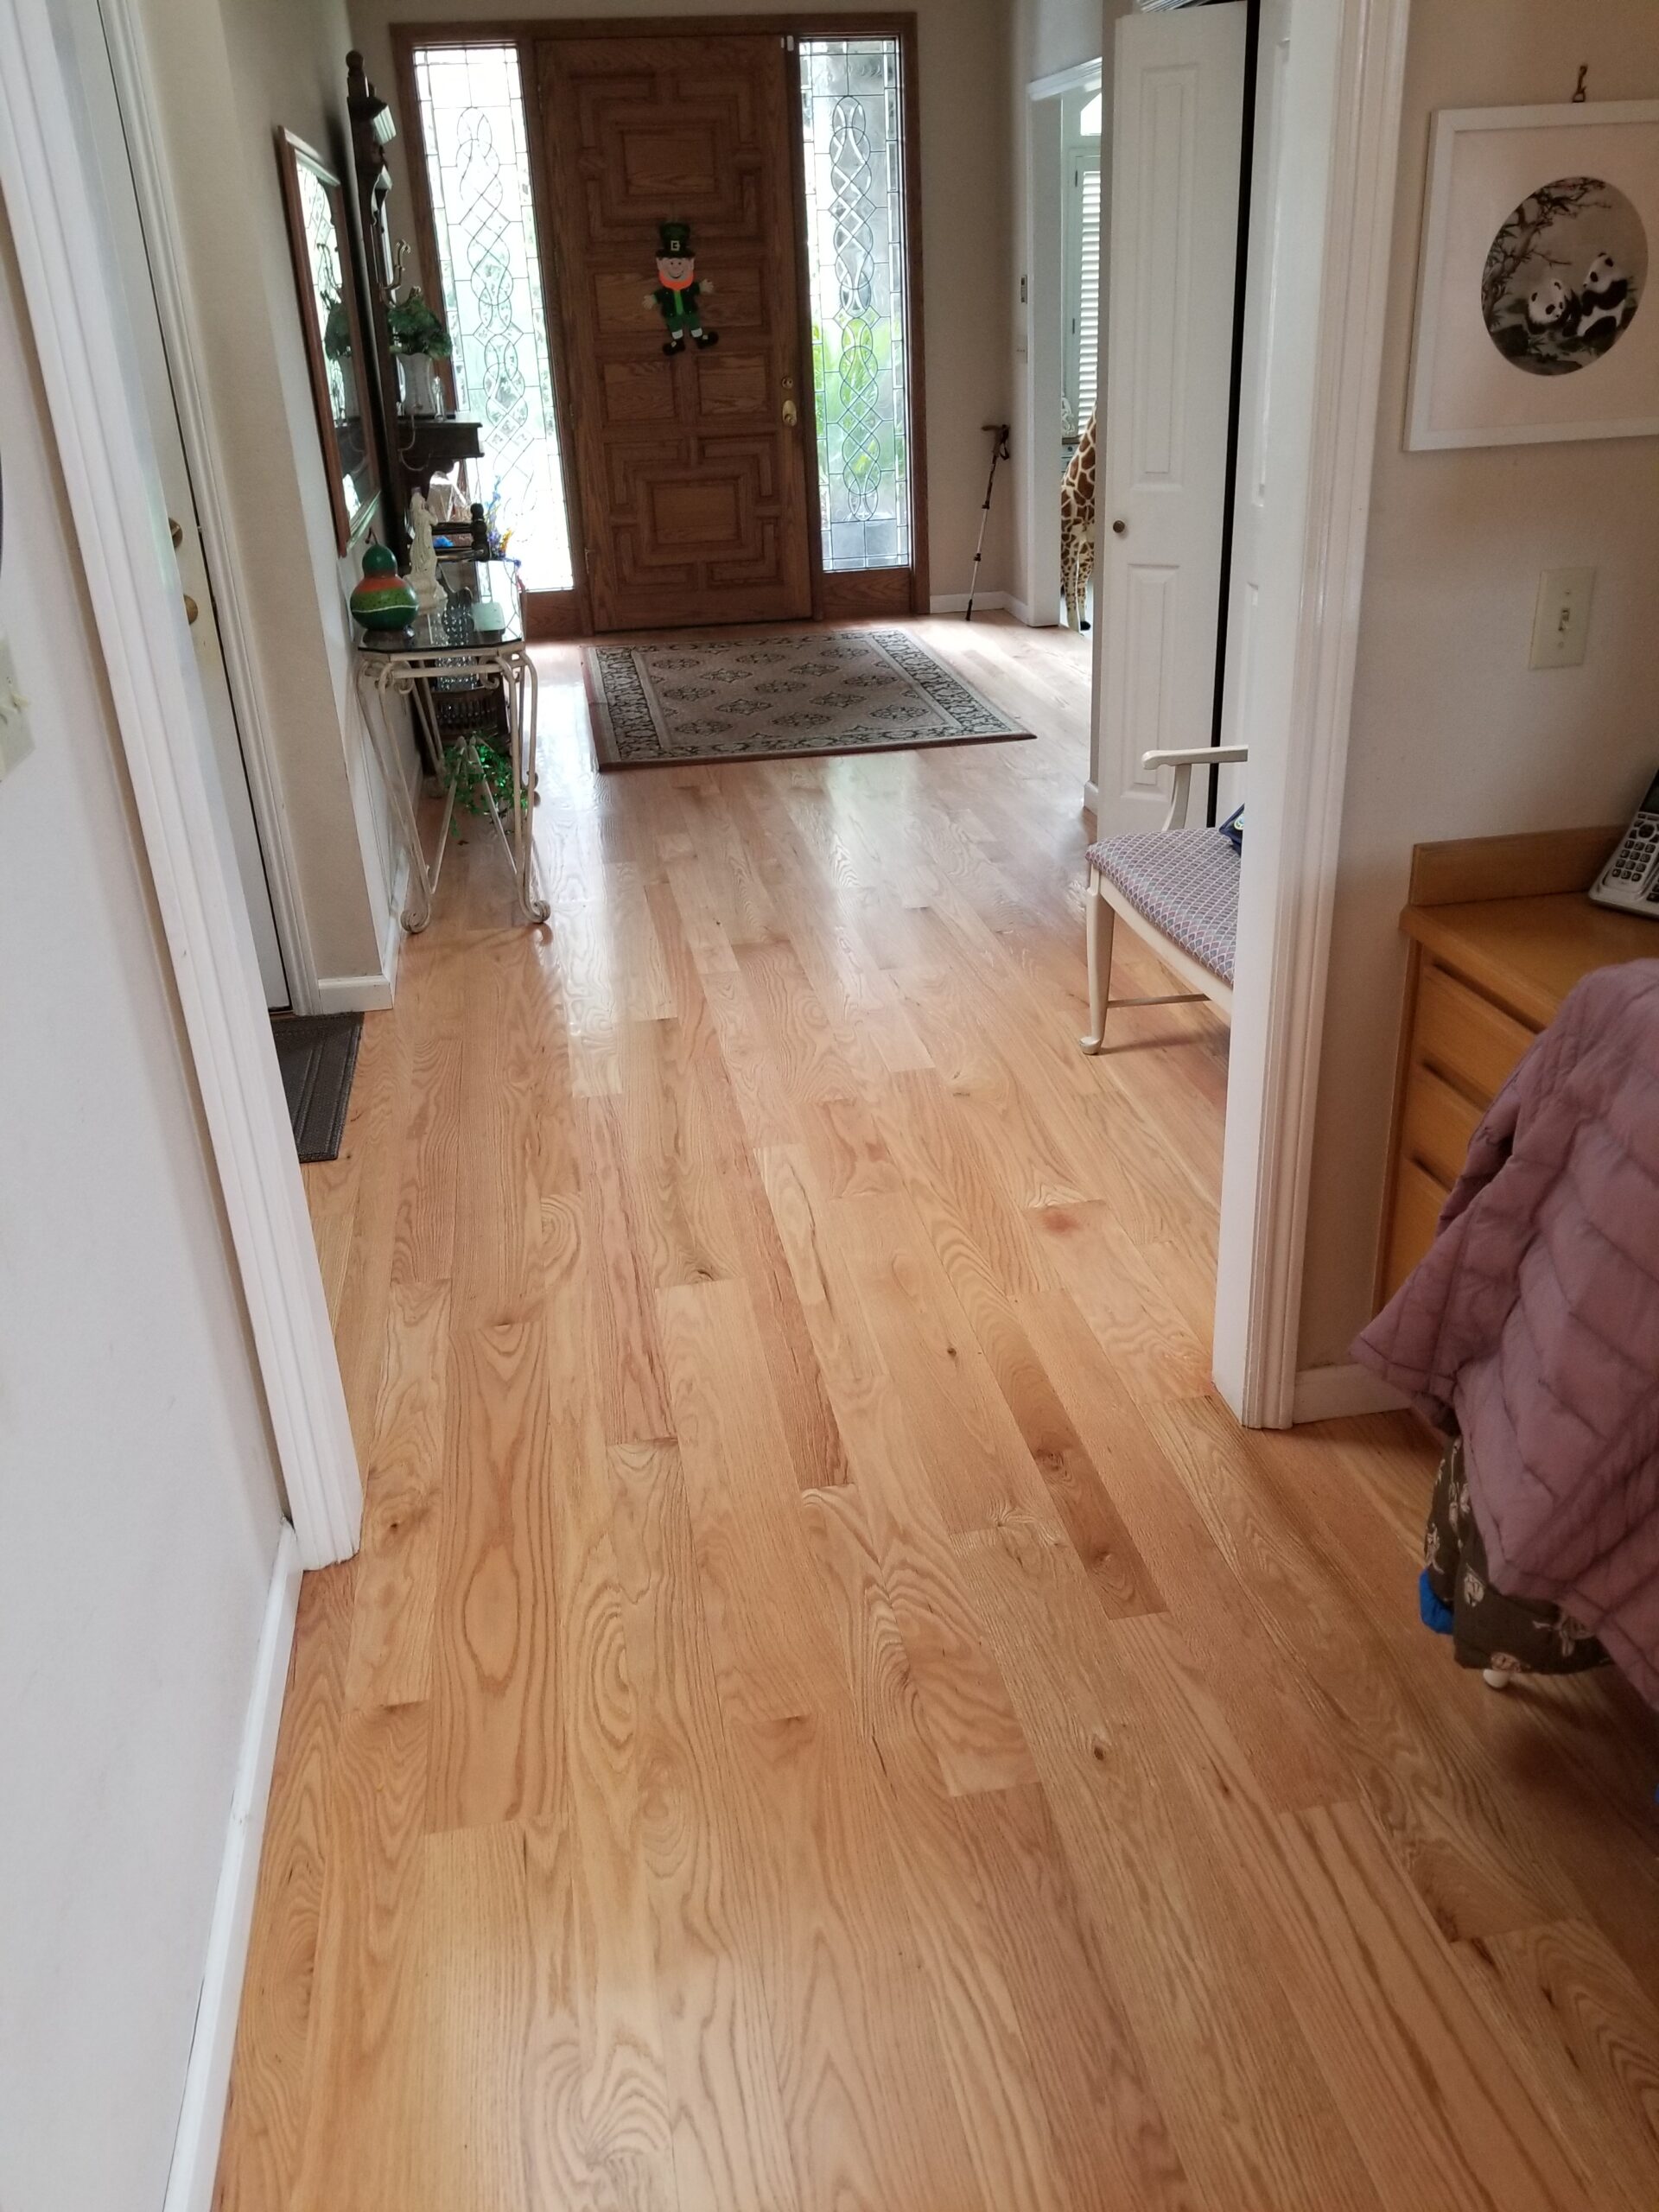 Los Altos home: 1500 square foot: Red Oak entry way installation and stain and refinish with 3 coats of H2O base semi-gloss finish.